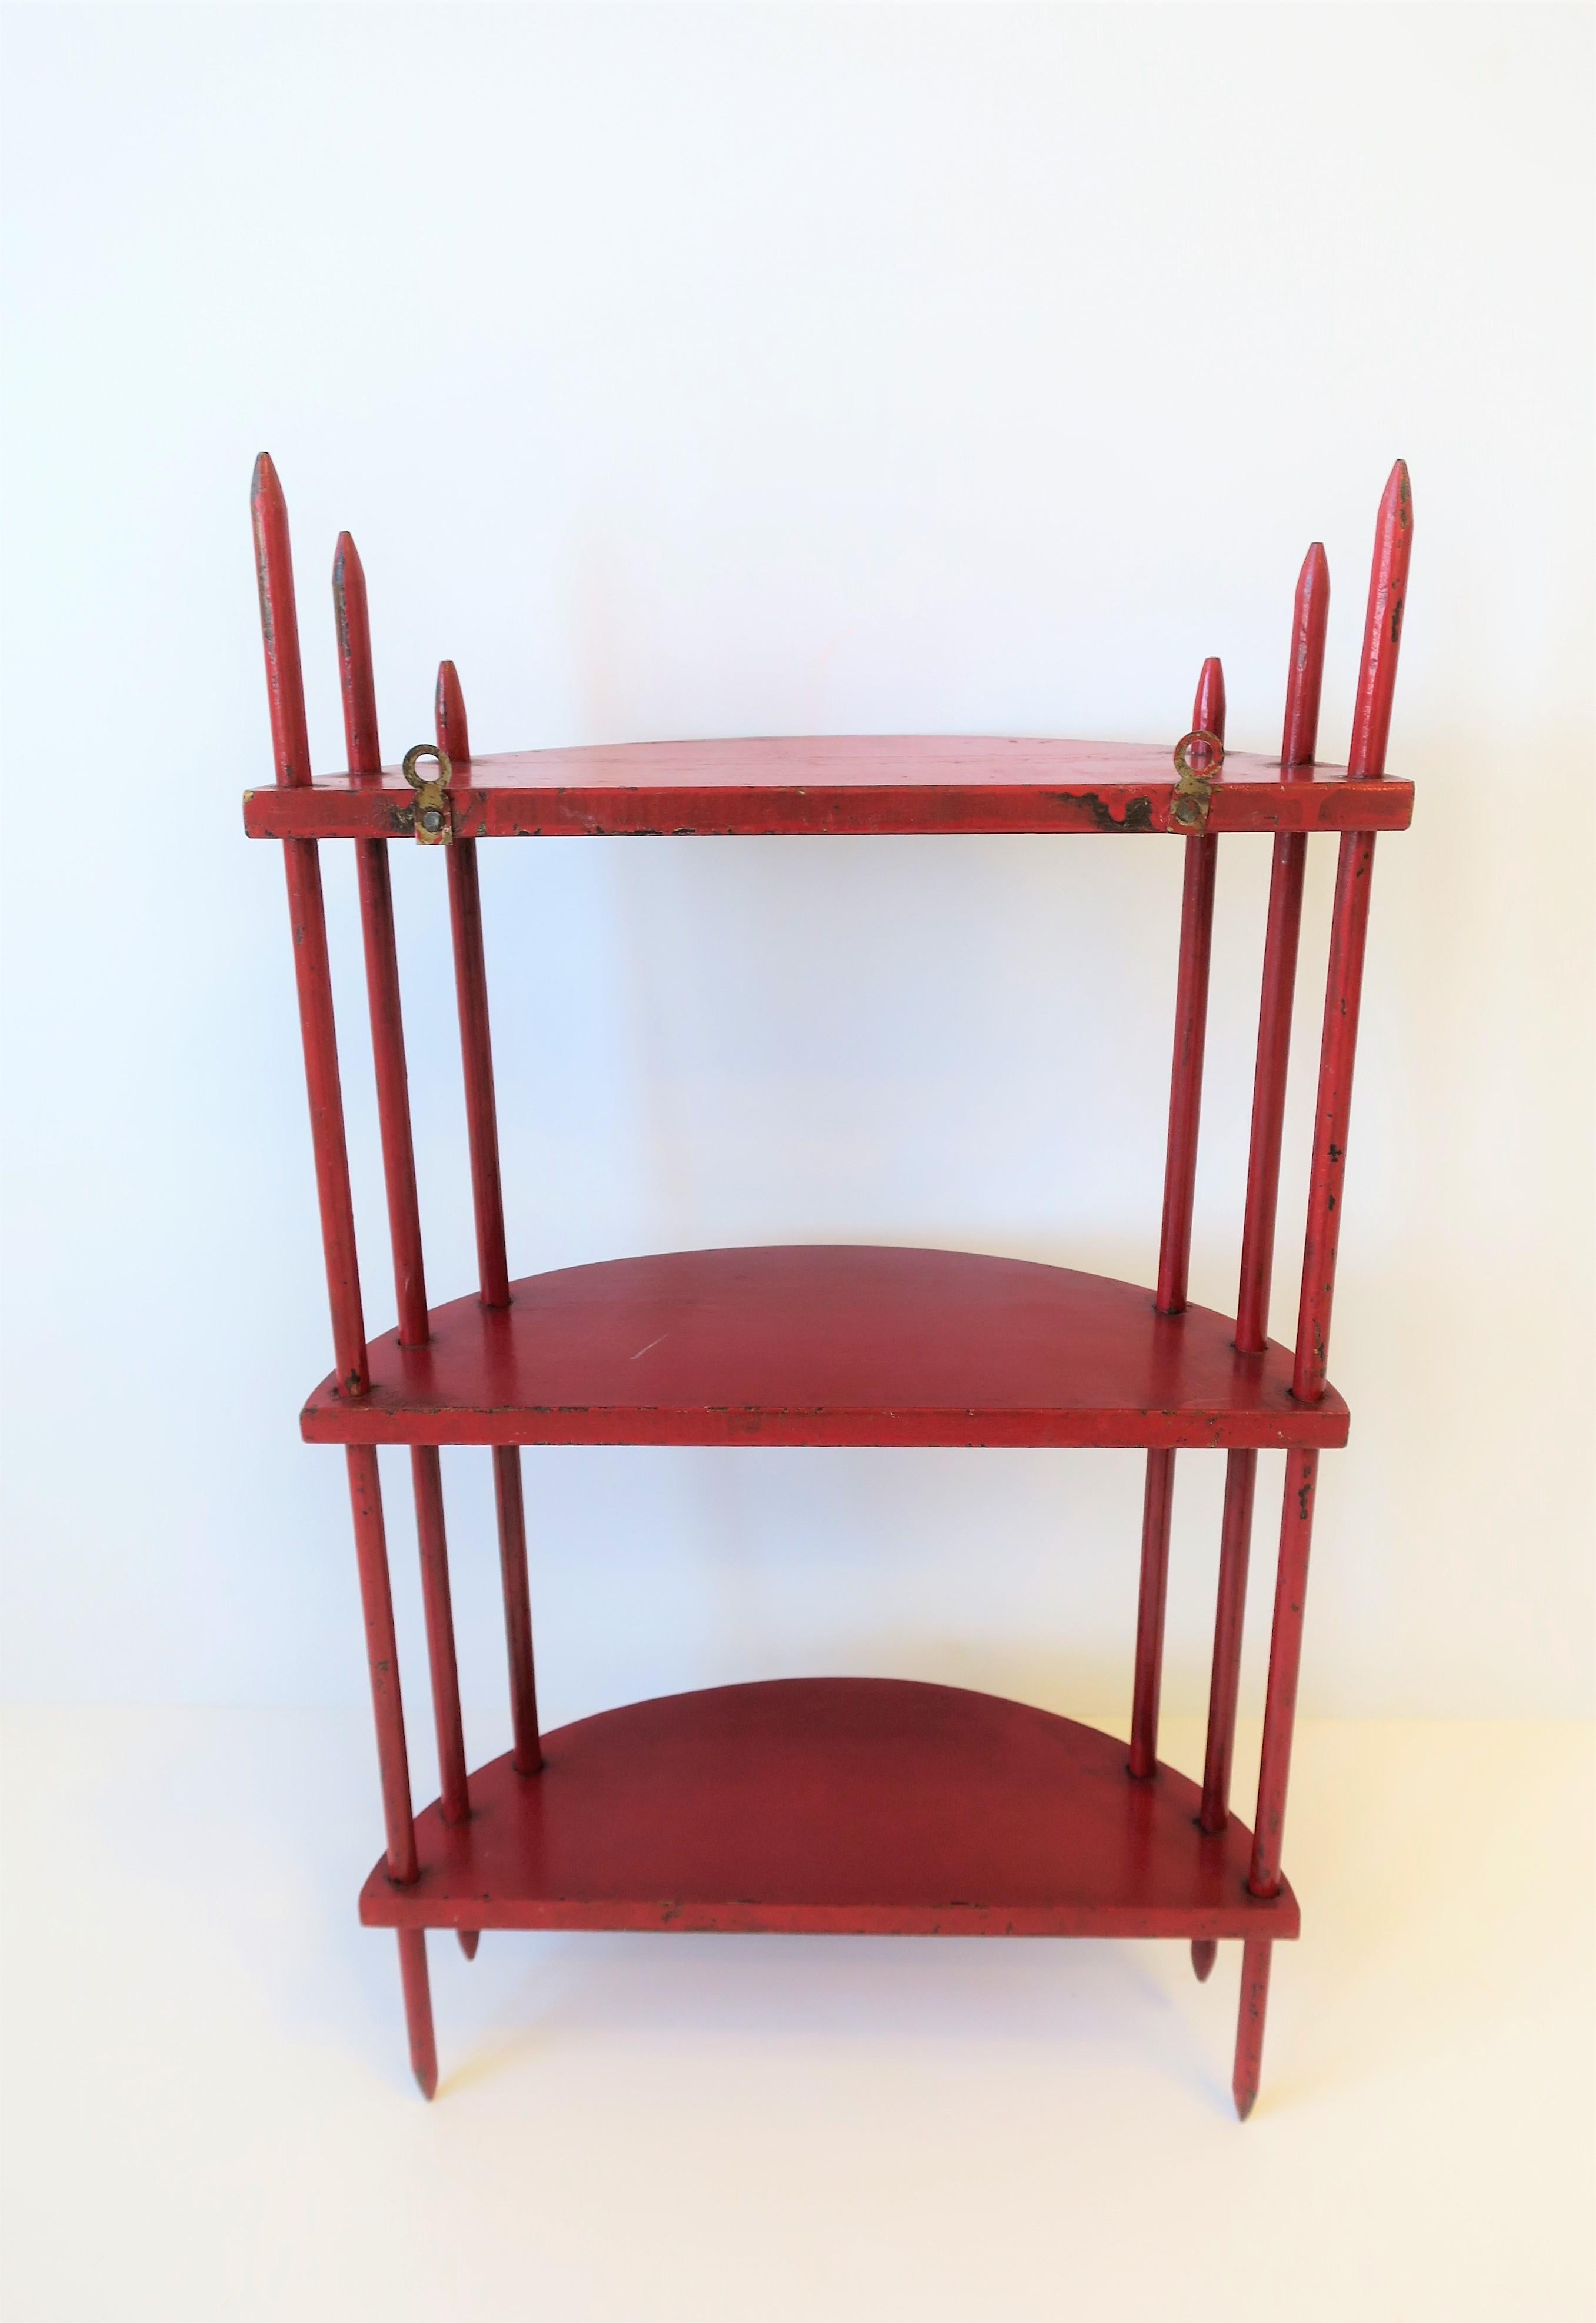 Art Deco Period Wood Wall Shelf in Red (Holz)